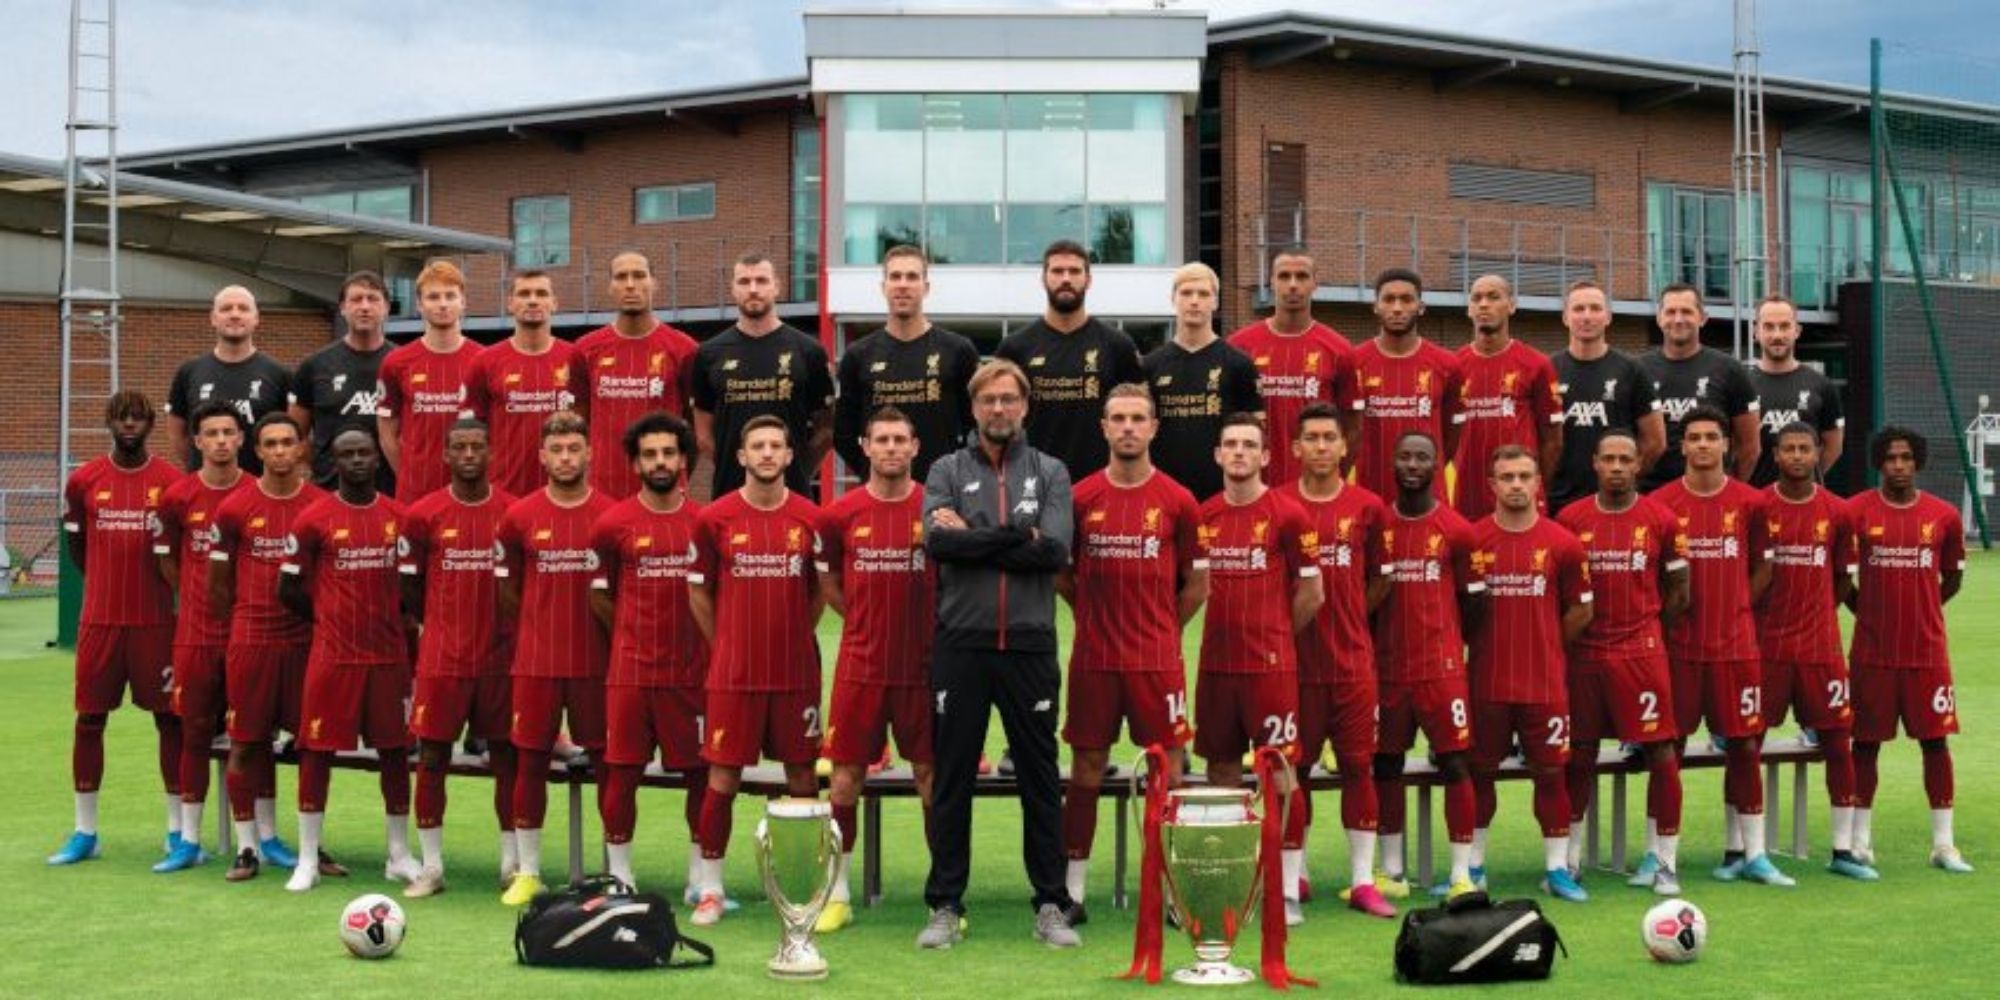 Official image of Liverpool football team,